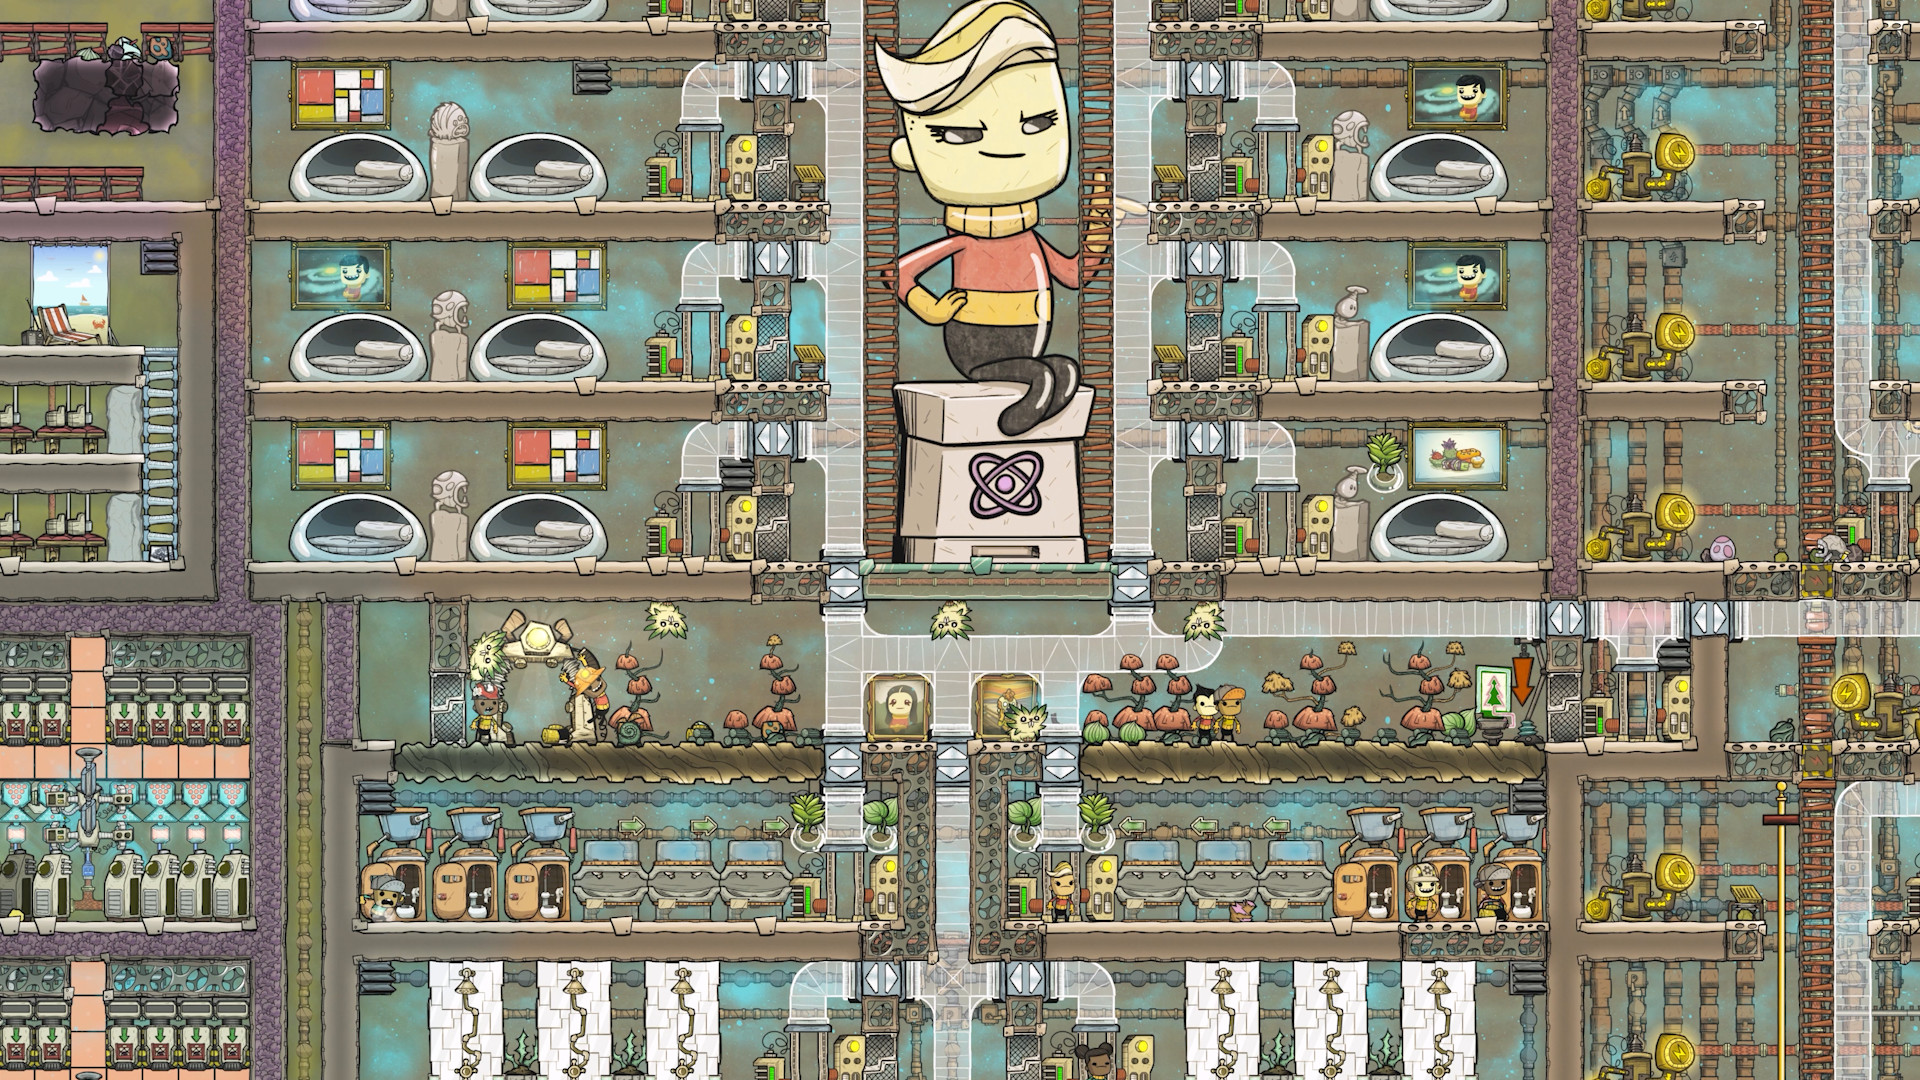 Oxygen Not Included - Spaced Out! Free Download for PC